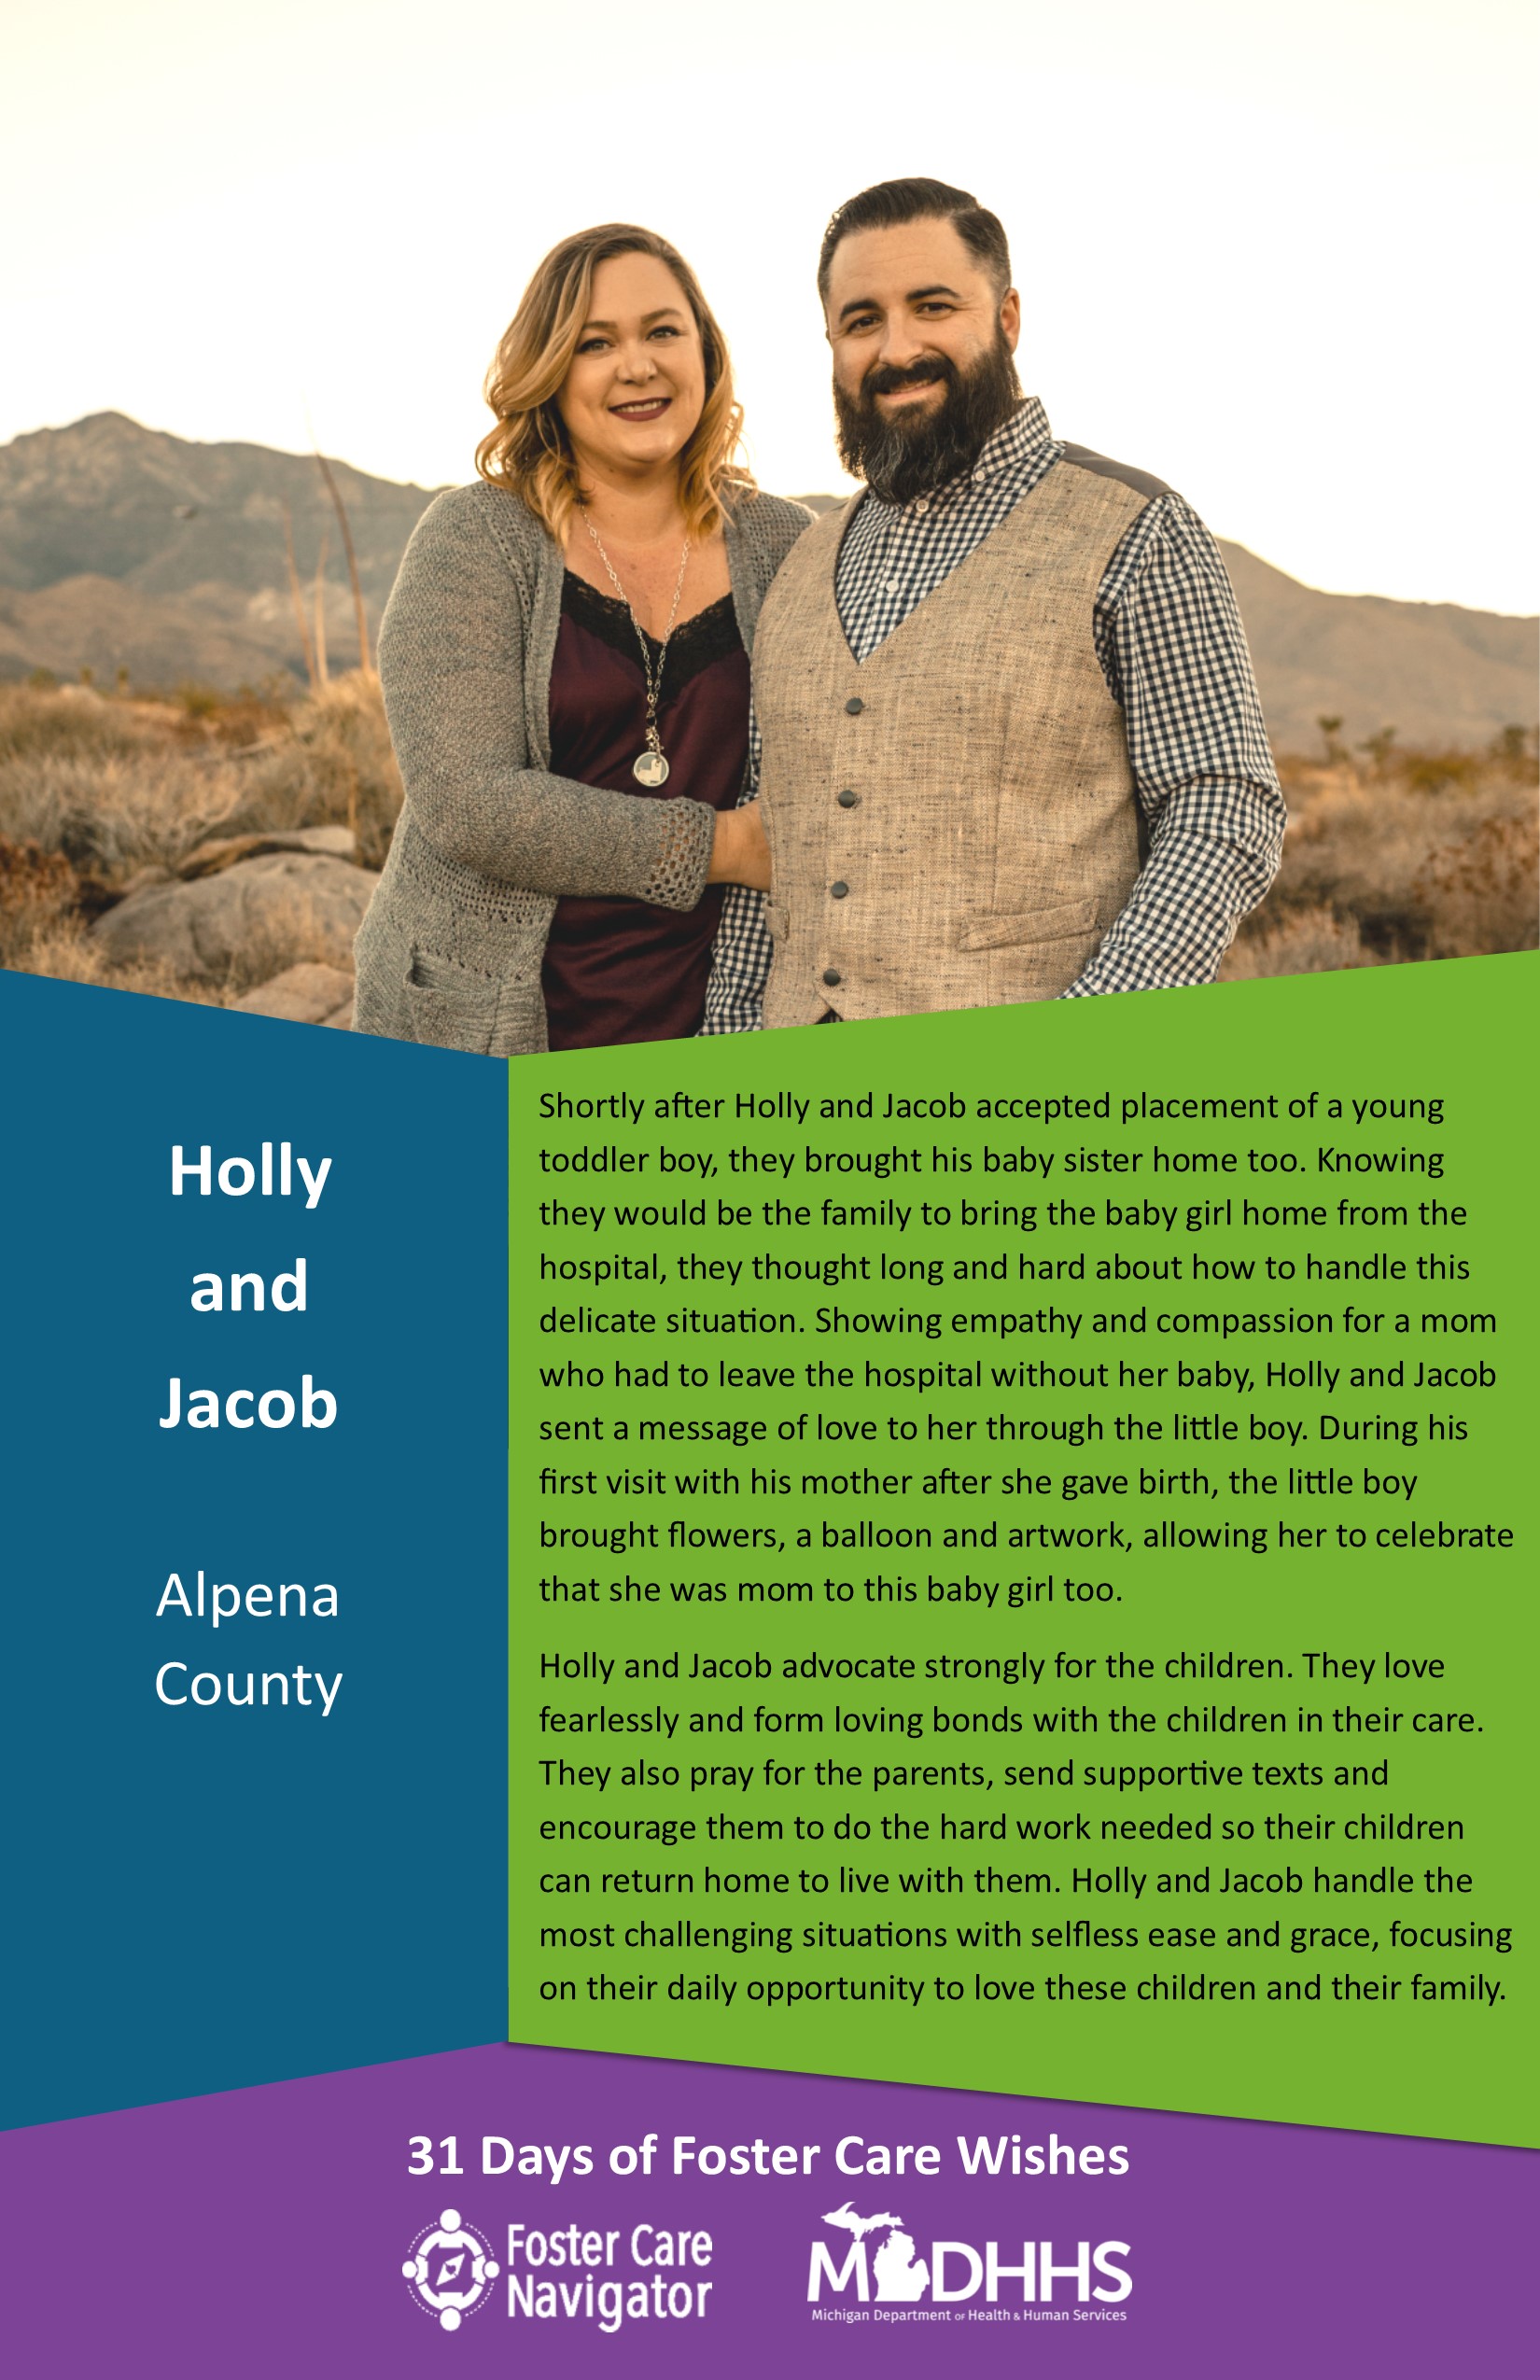 This full page feature includes all of the text listed in the body of this blog post as well as a photo of Holly and Jacob. The background is blue on the left, green on the right, and purple at the bottom of the page where the logos are located.